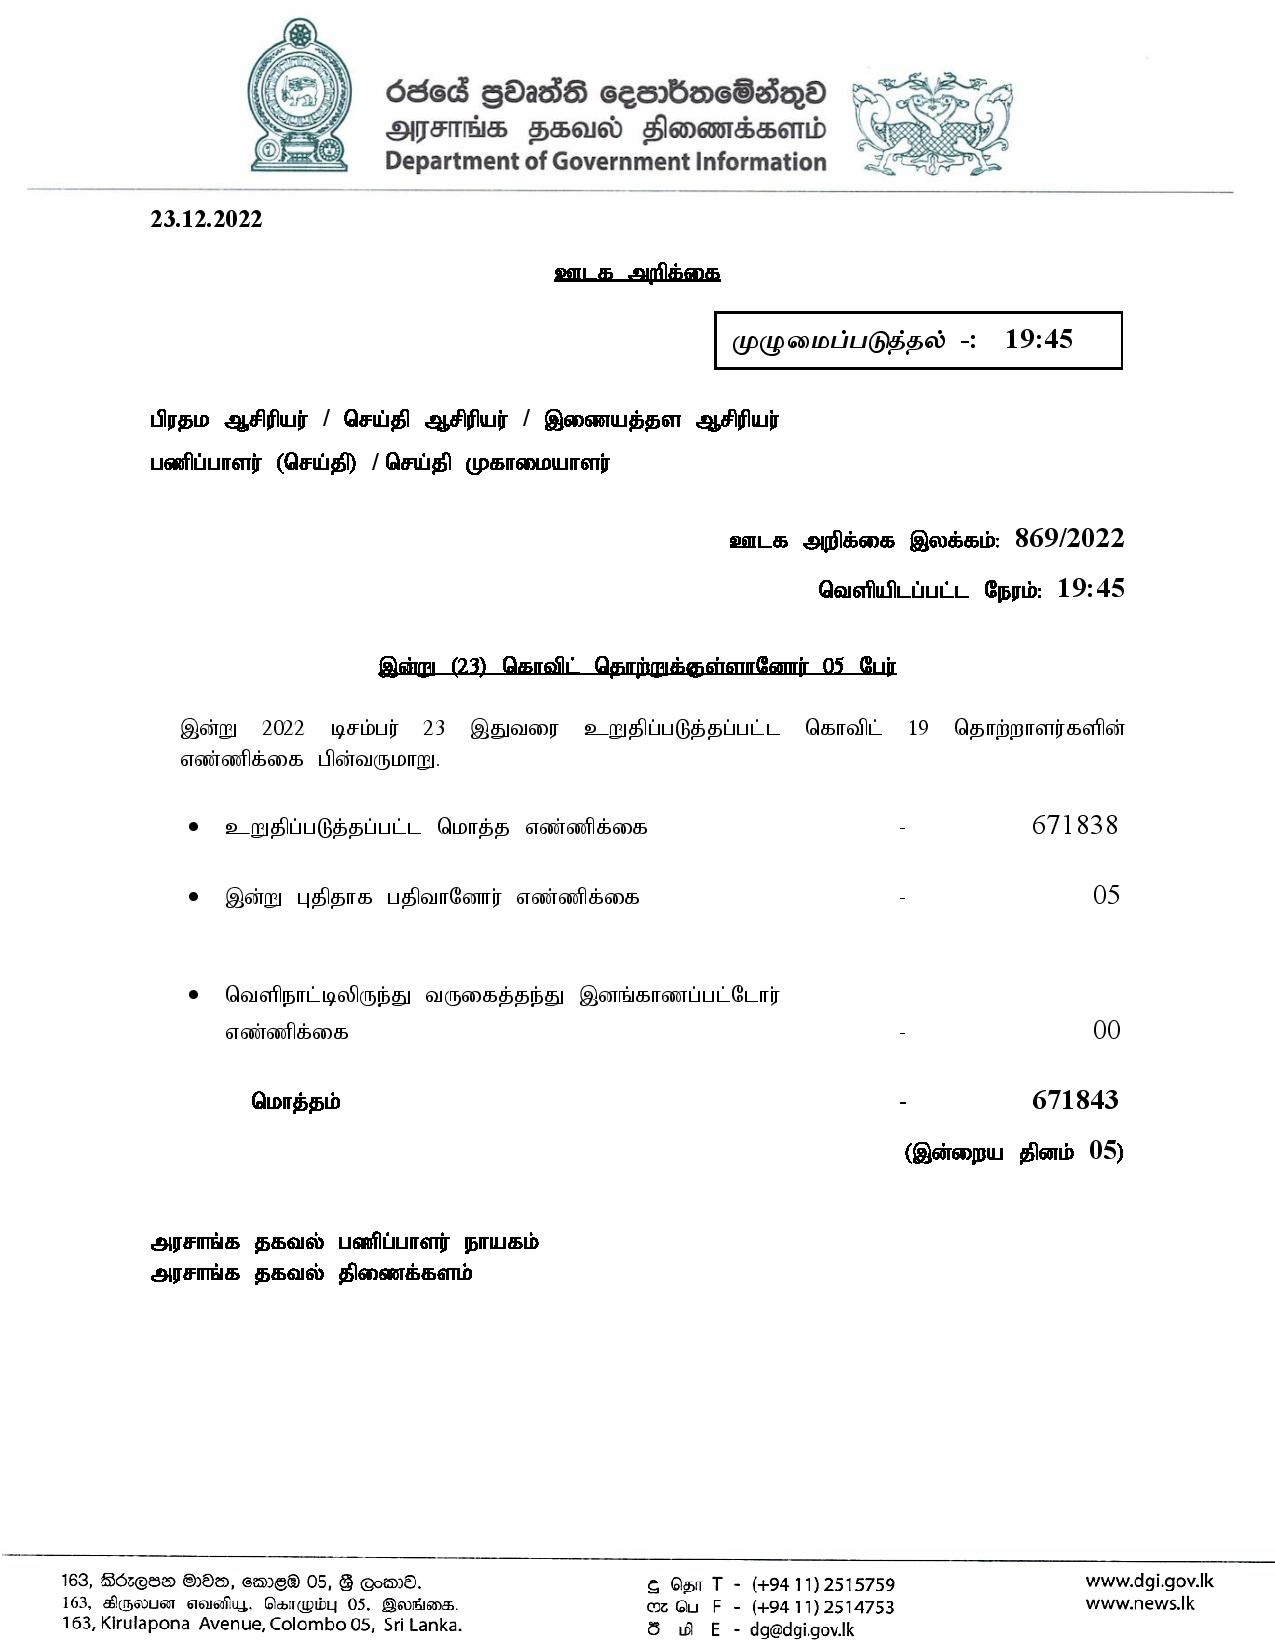 Release No 869 Tamil page 001